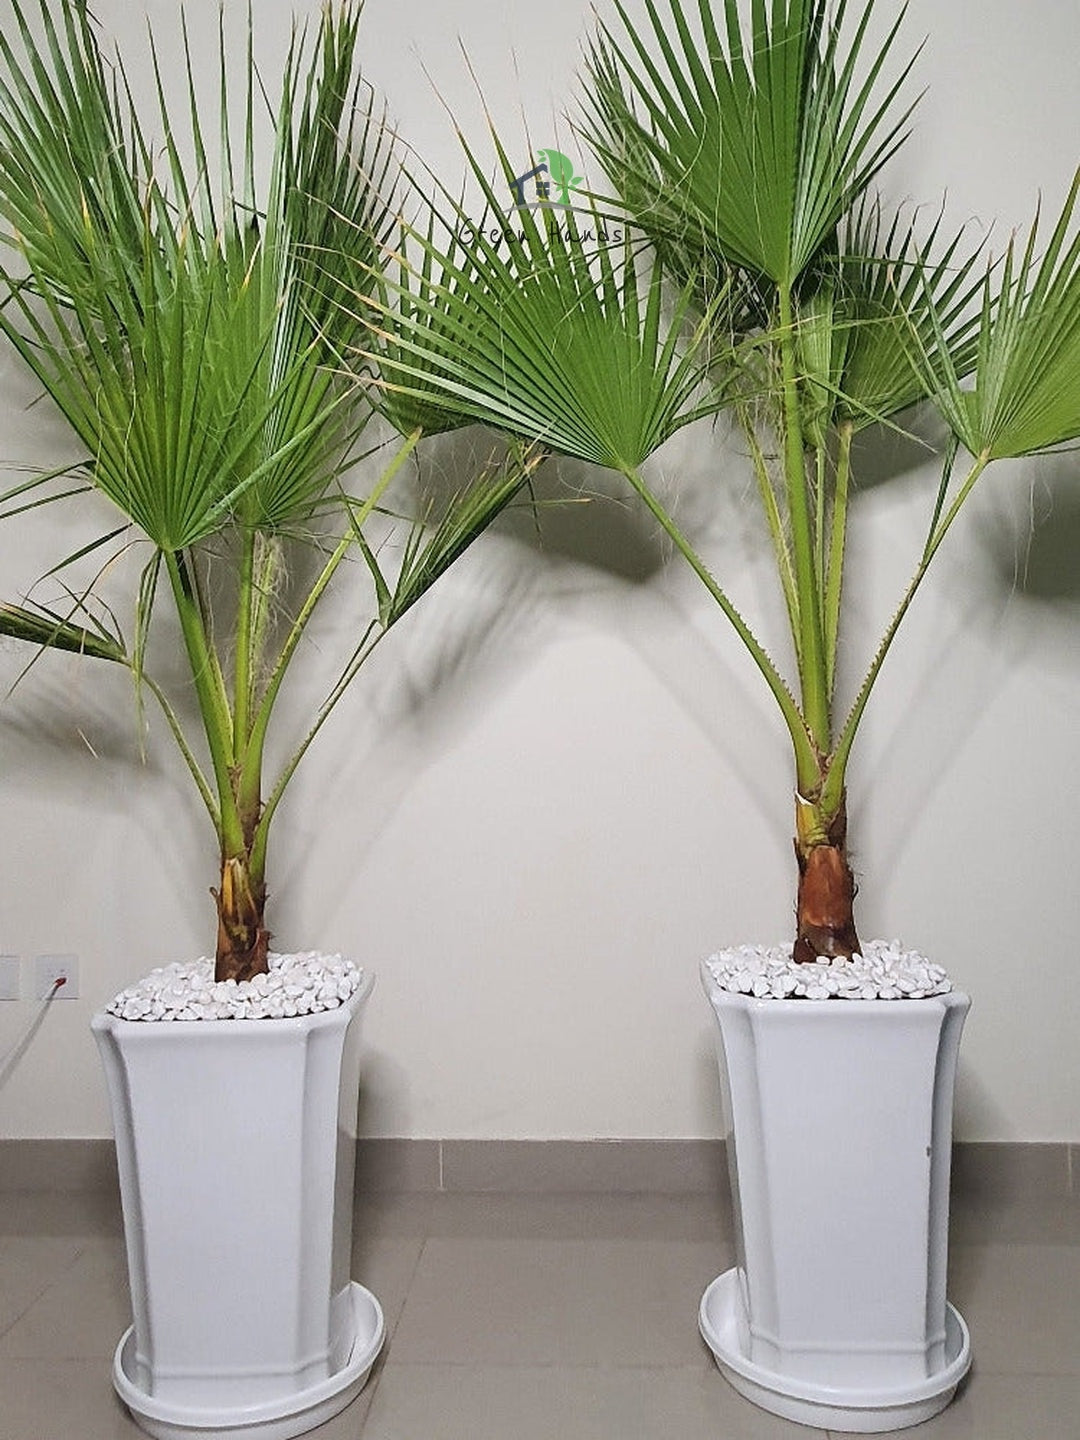 online potted washington palm in dubai, xl outdoor plants, green hands, white pots